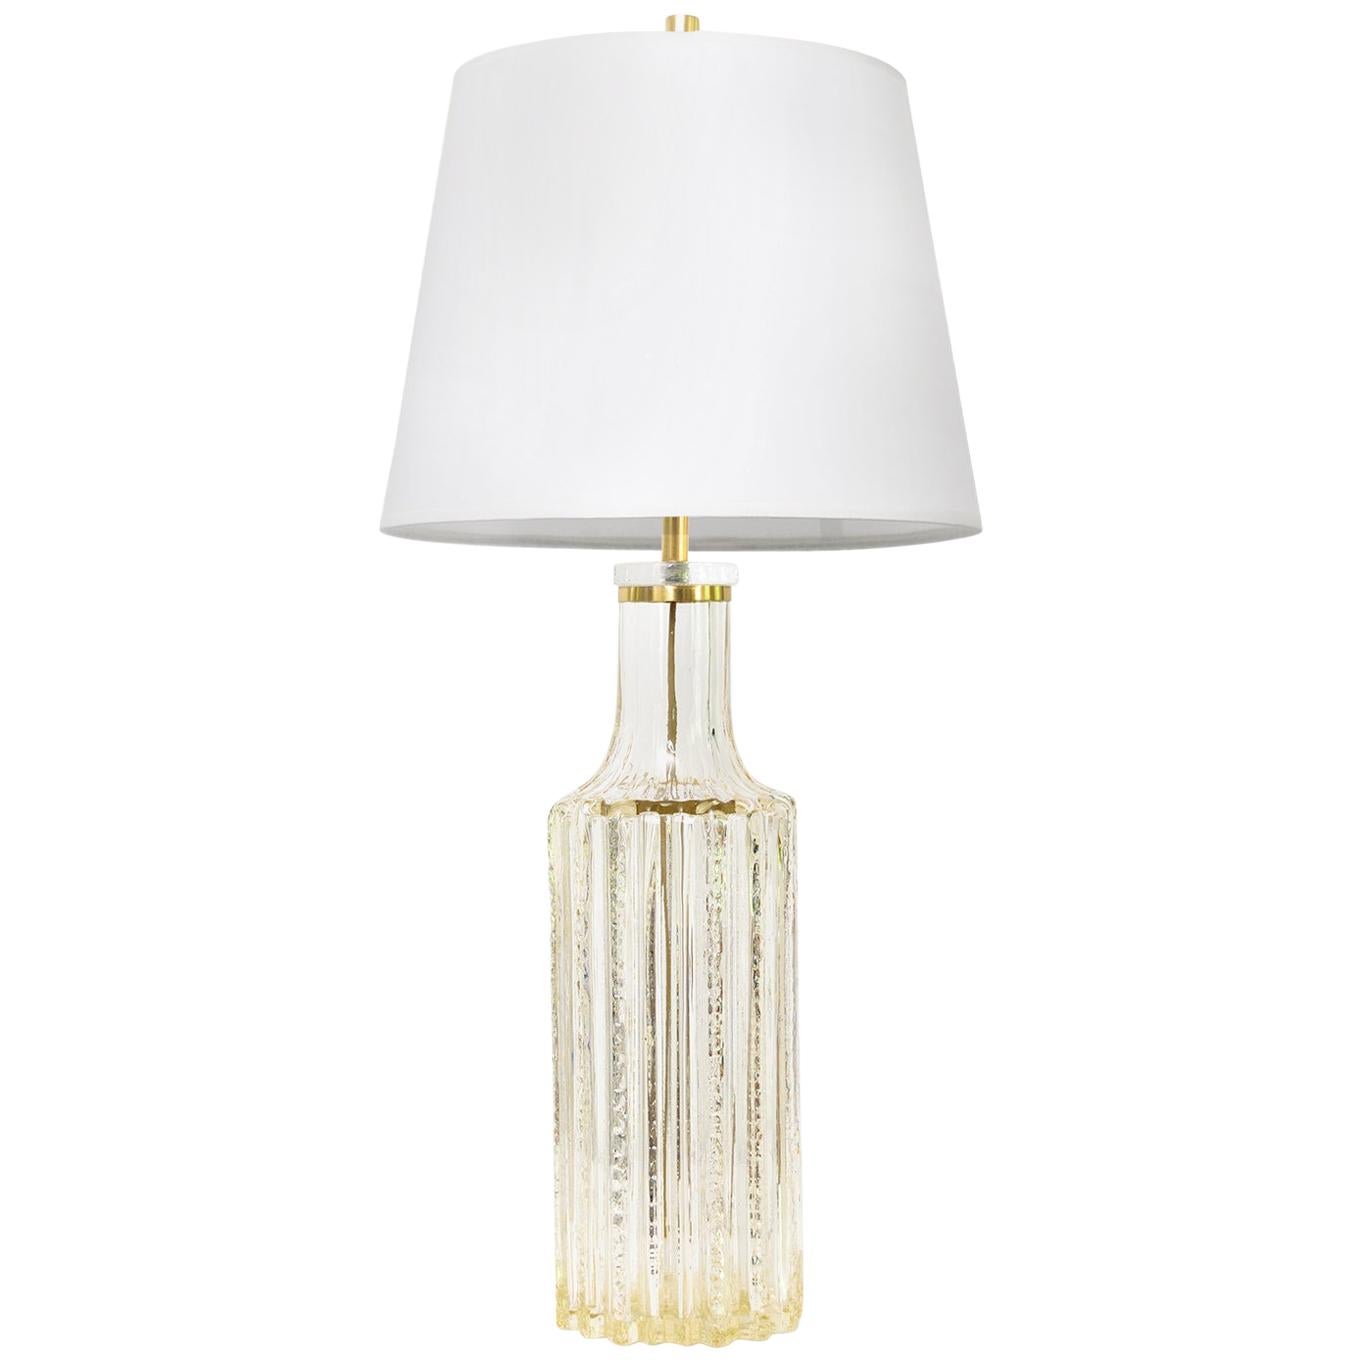 Scandinavian Modern Highly Textured Clear Glass Table Lamp with Brass Details For Sale